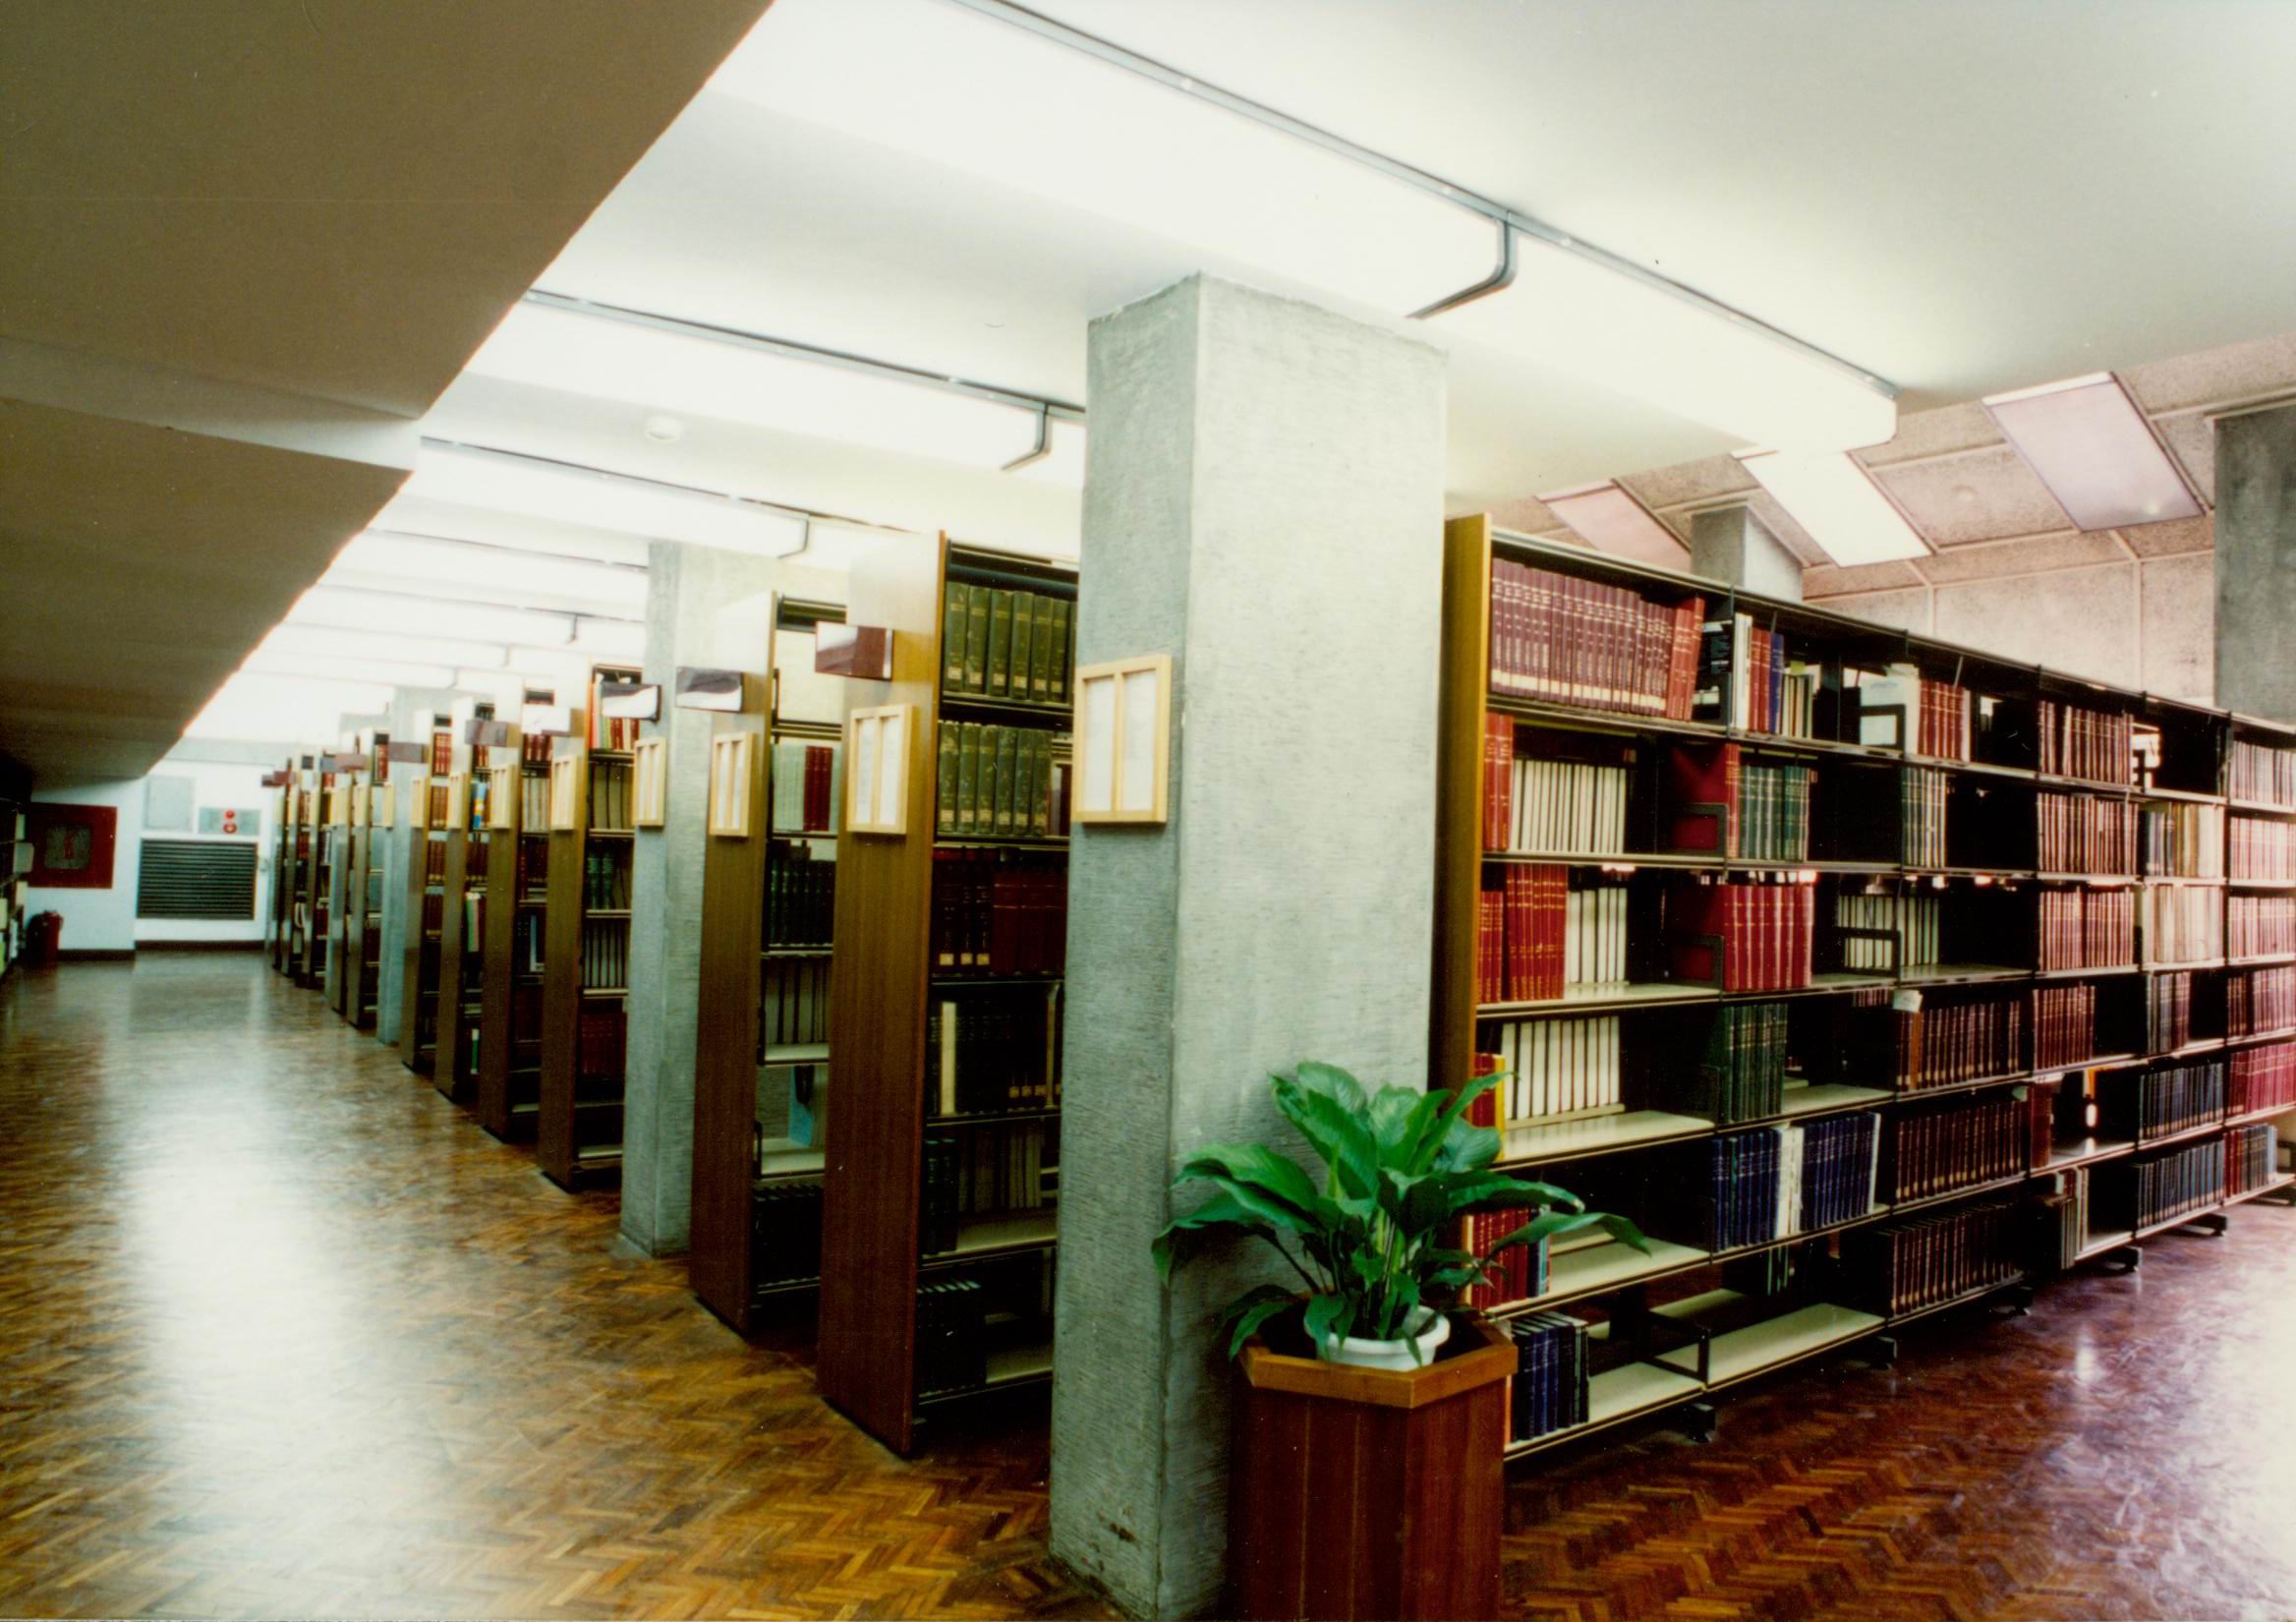 Guided Tours of the Library's Architecture